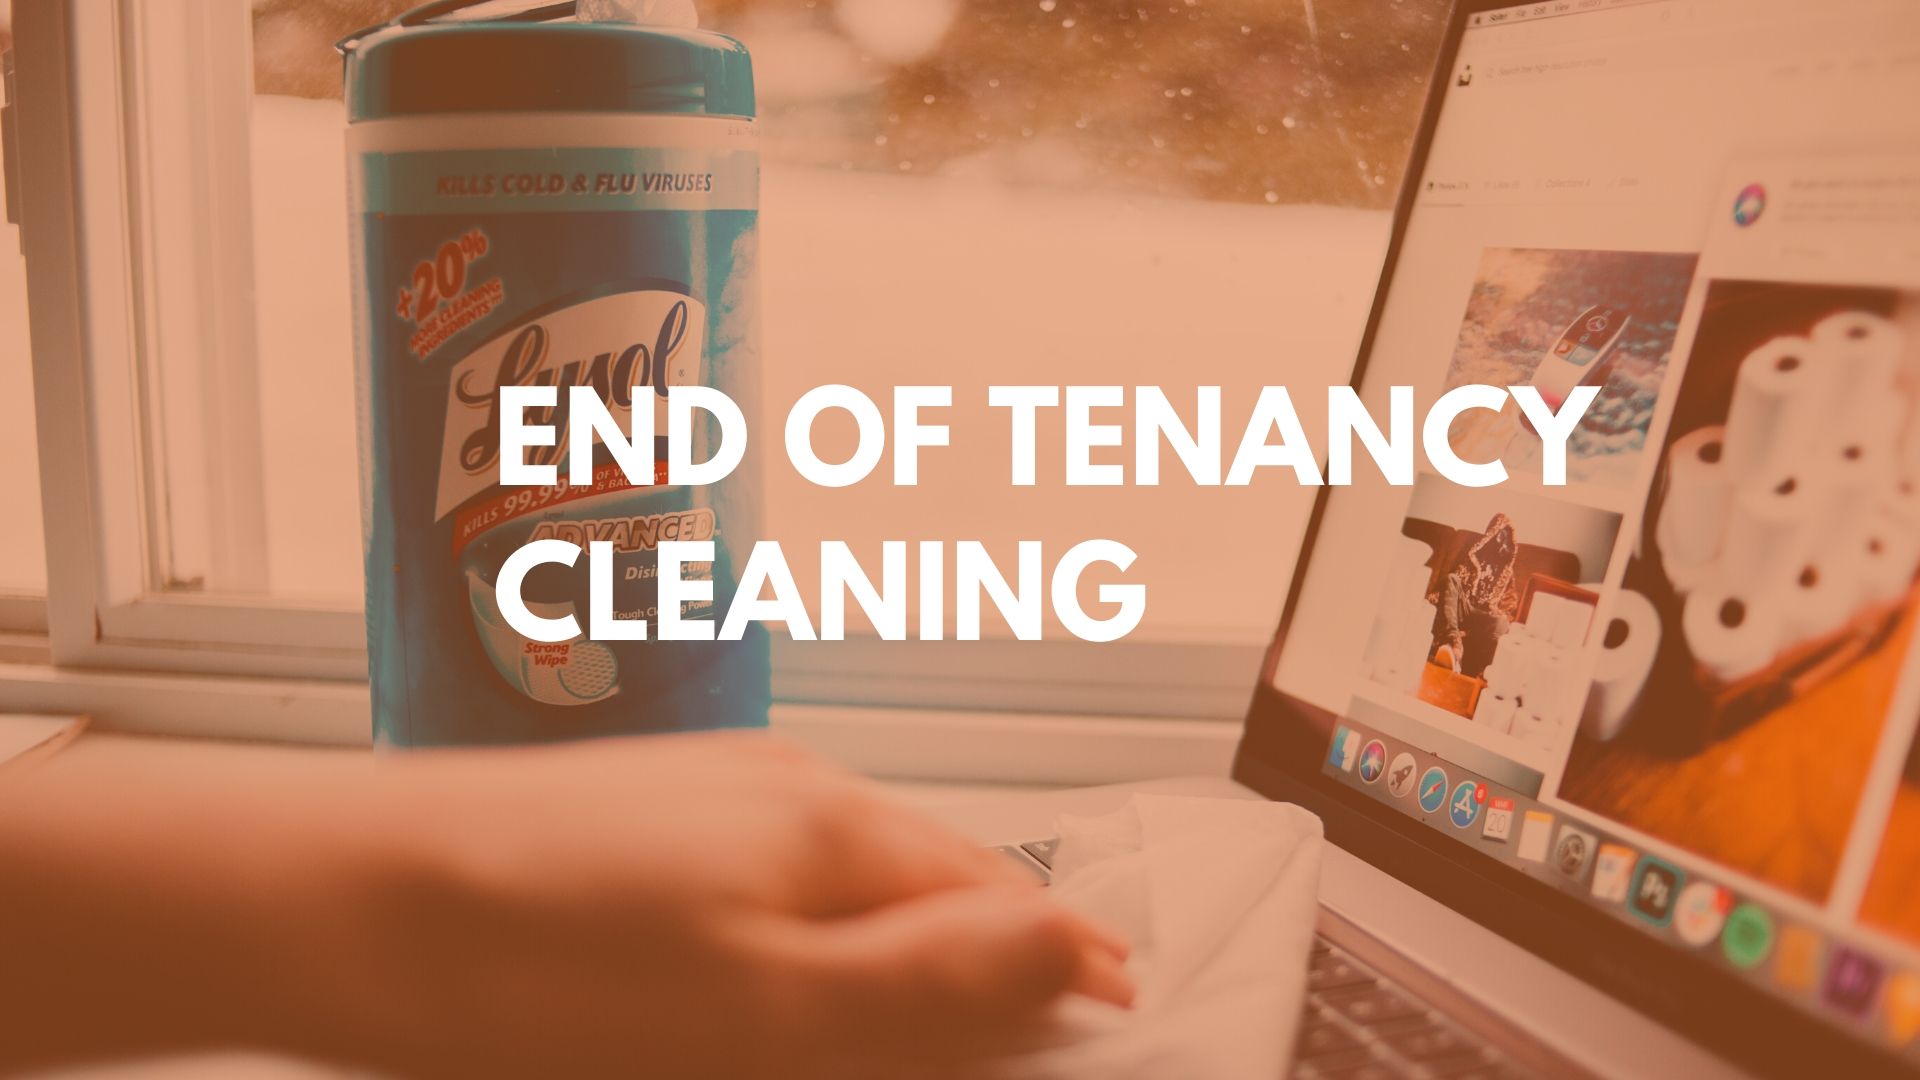 End of Tenancy Cleaning